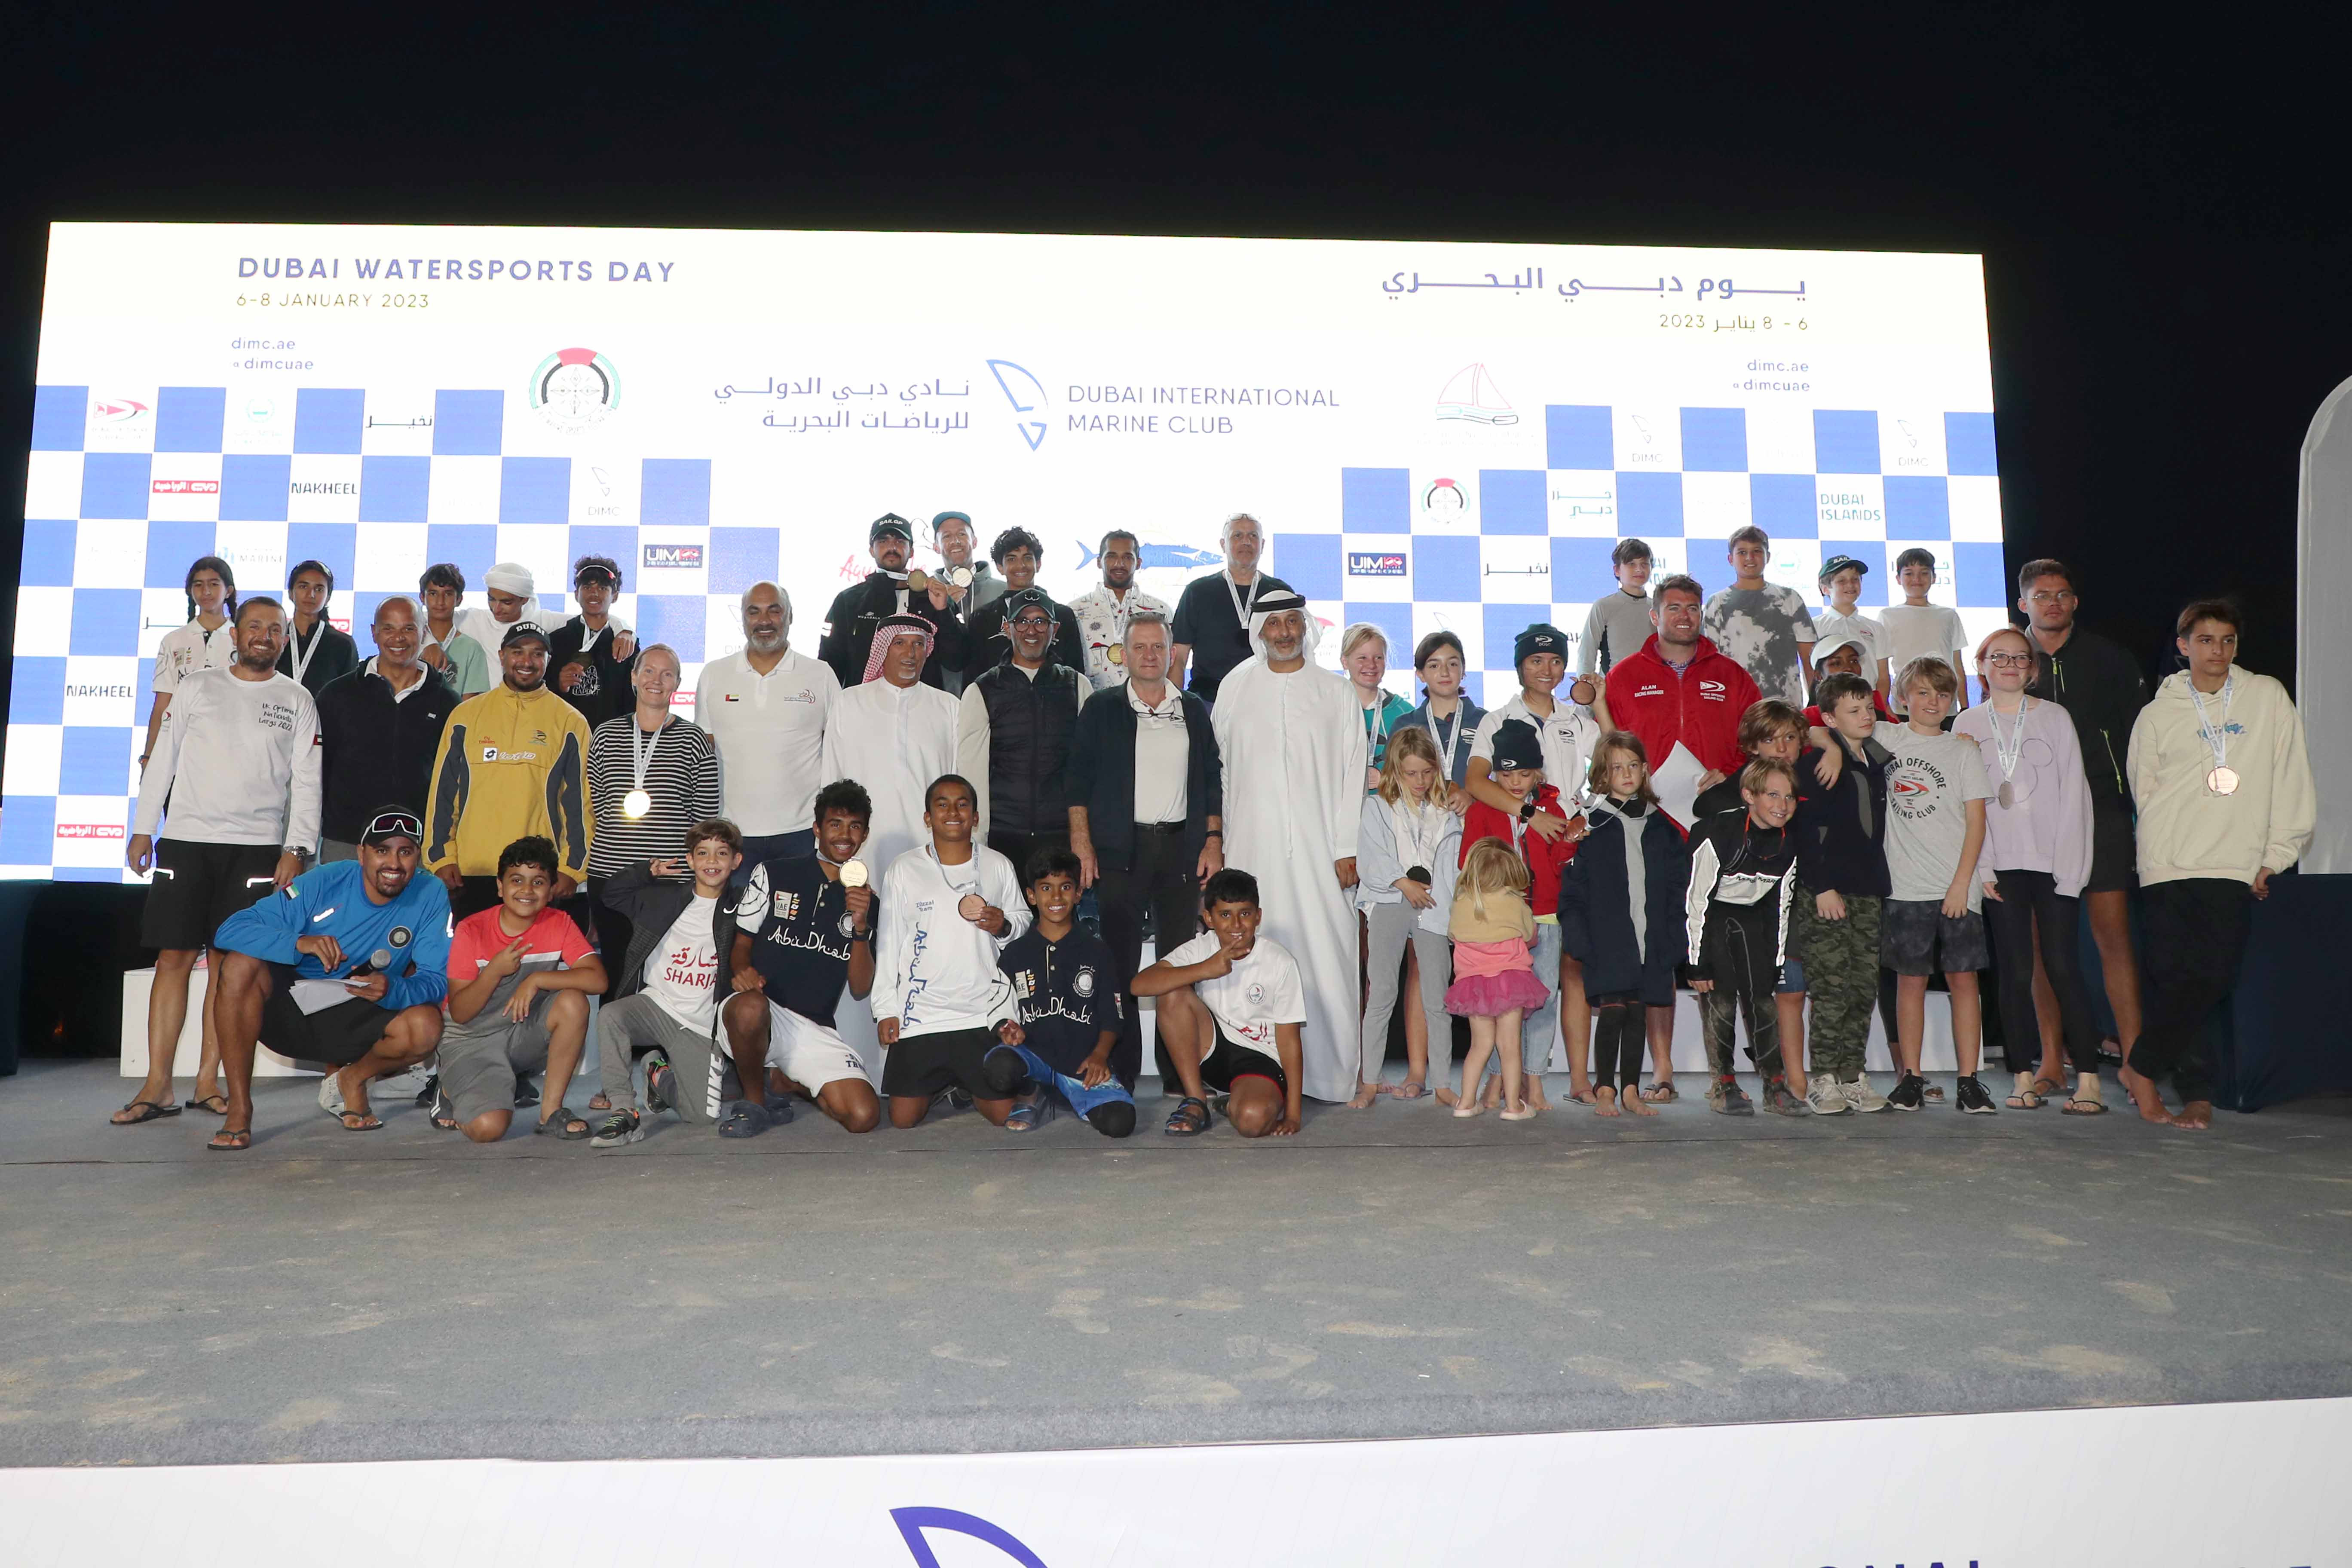 (Dubai Watersports Day) brings together 54 Male & Female Modern Sailing Participants